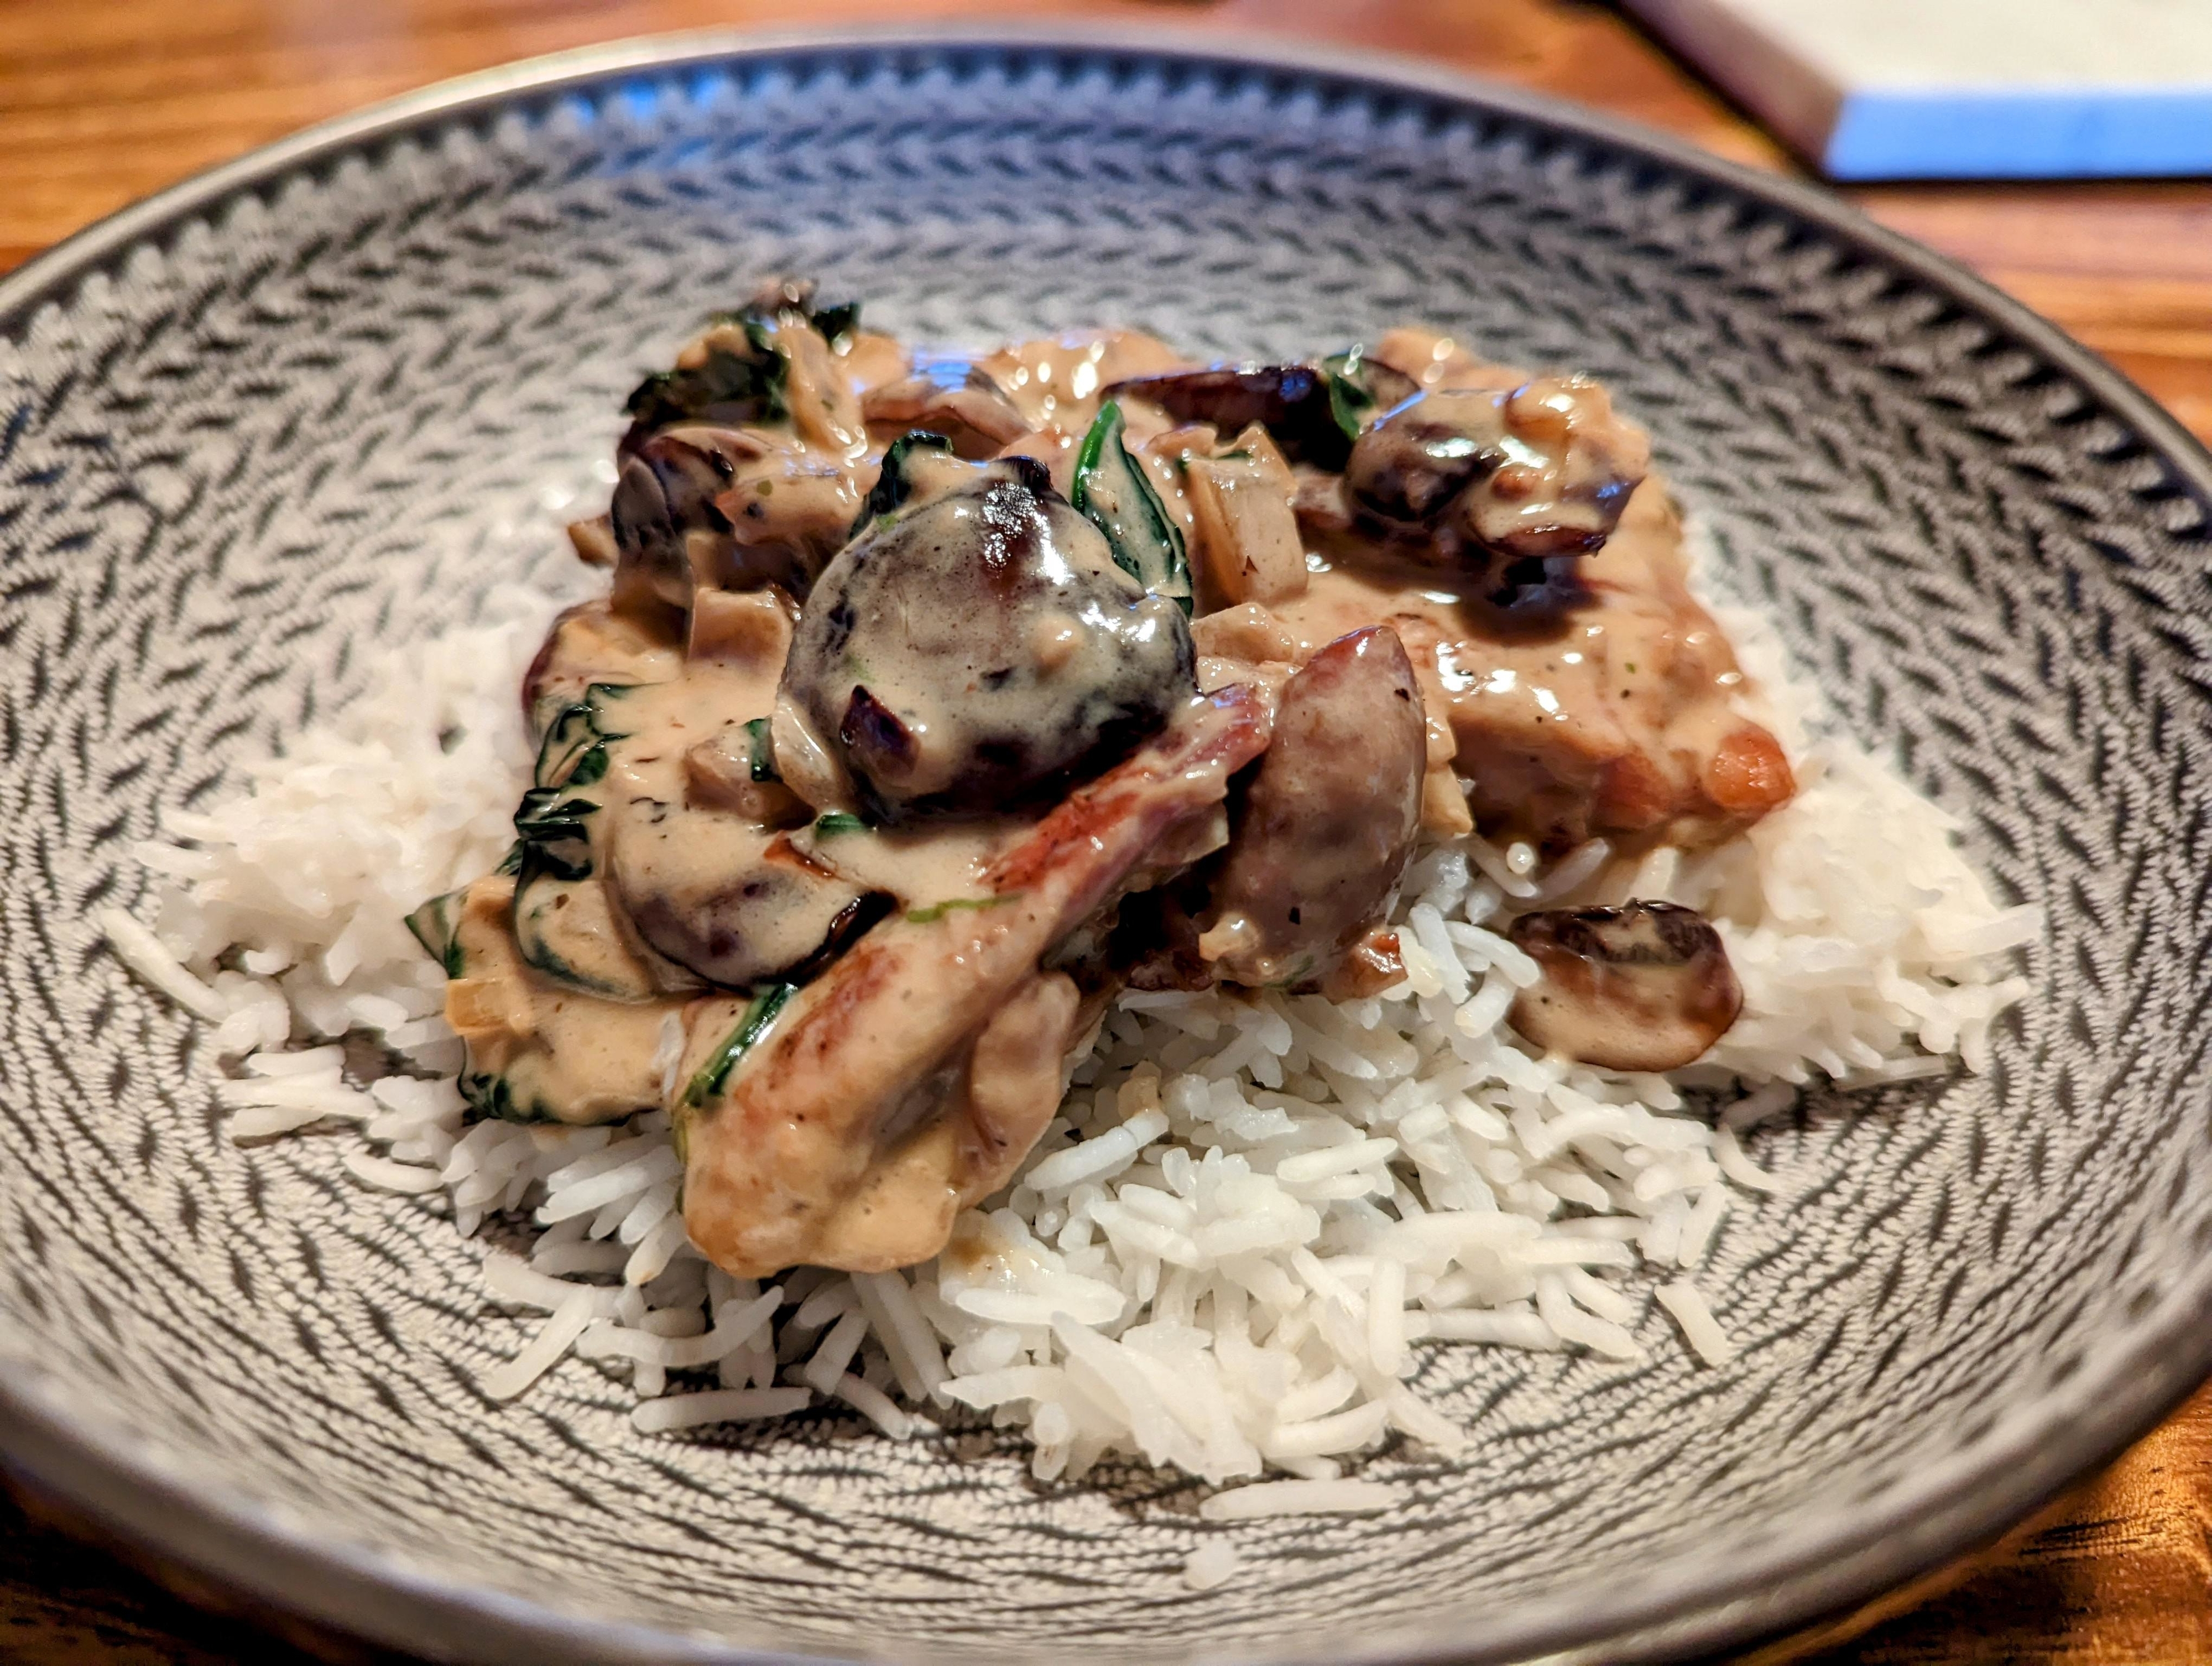 Creamy chicken and mushroom sauce over rice served in a bowl